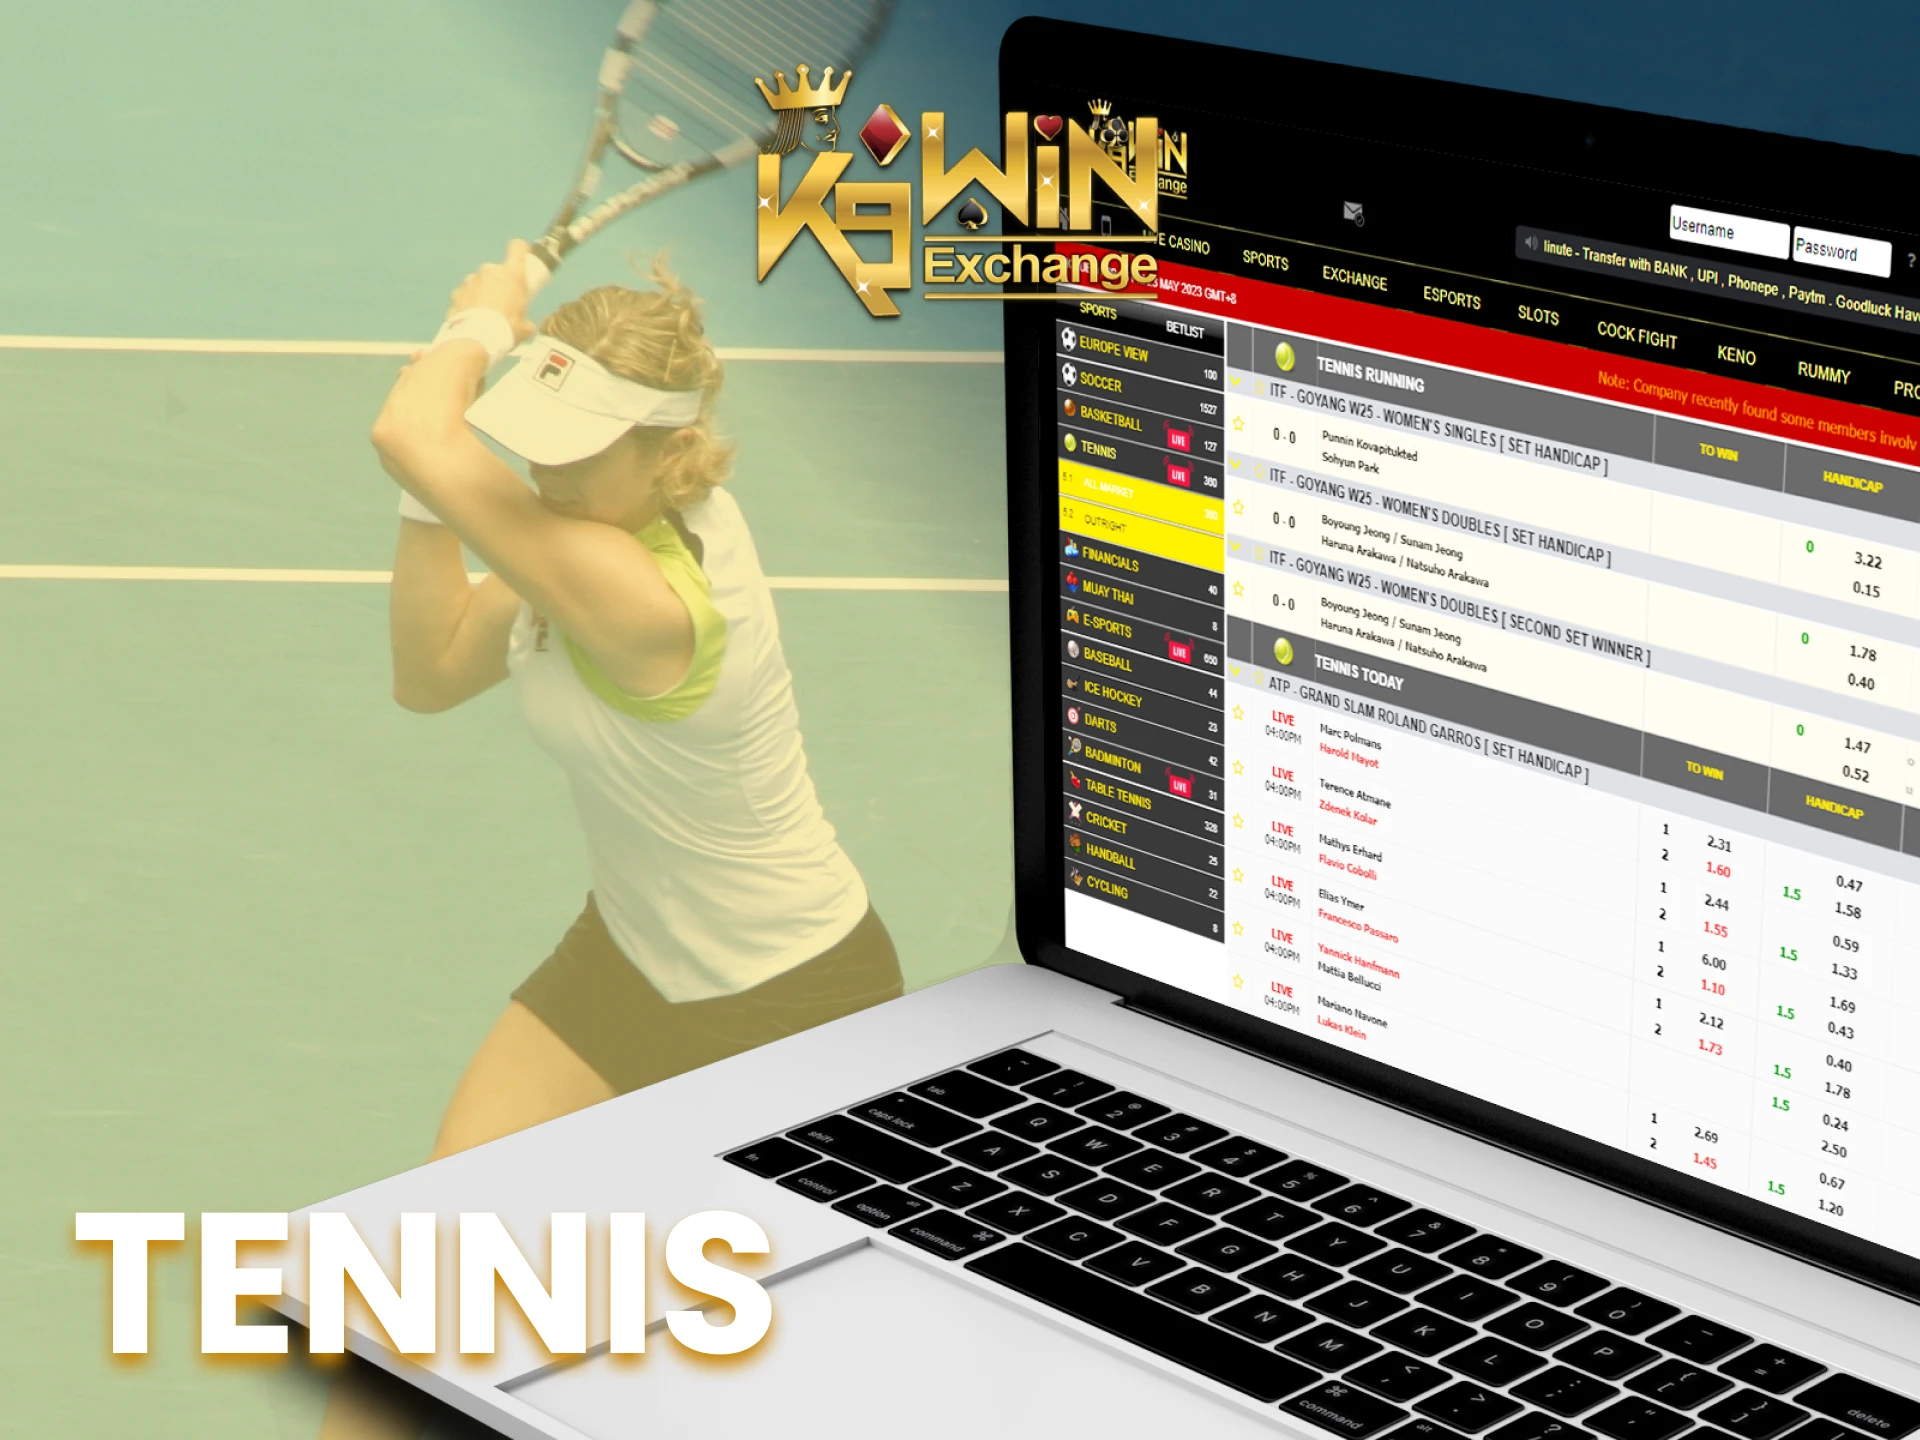 Bet on and watch tennis games on the K9Win sports page.